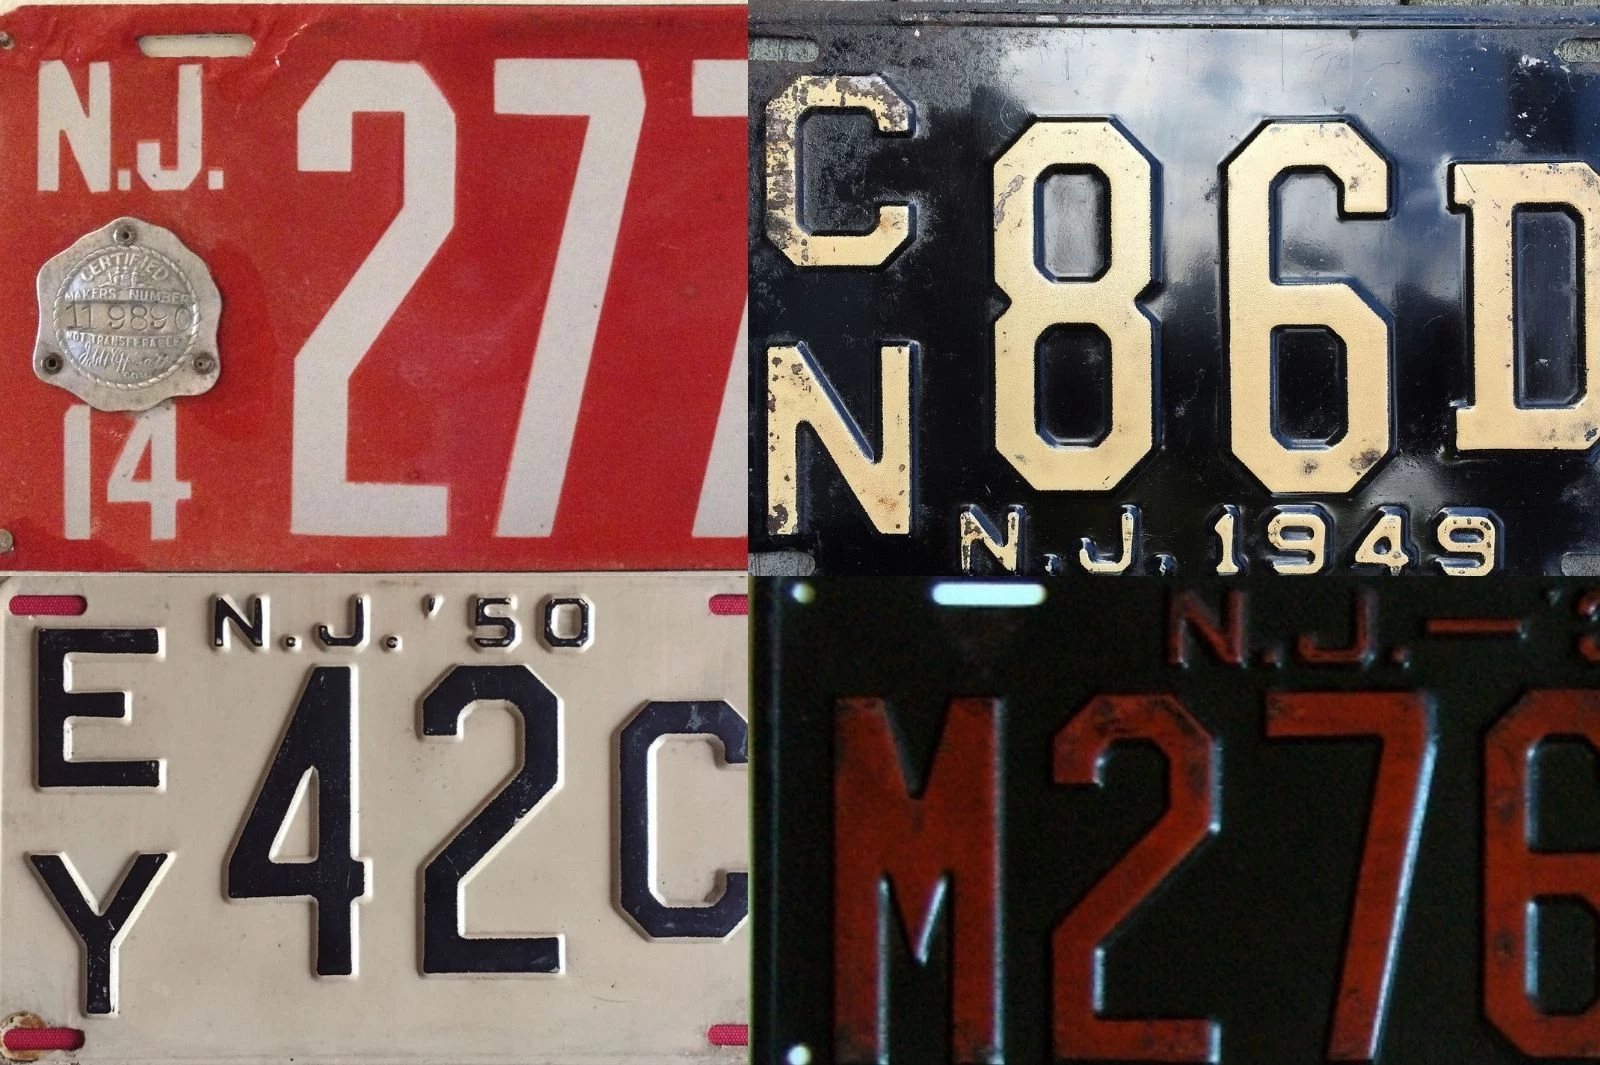 2020 New Jersey License Plate  License plates for sale, Old